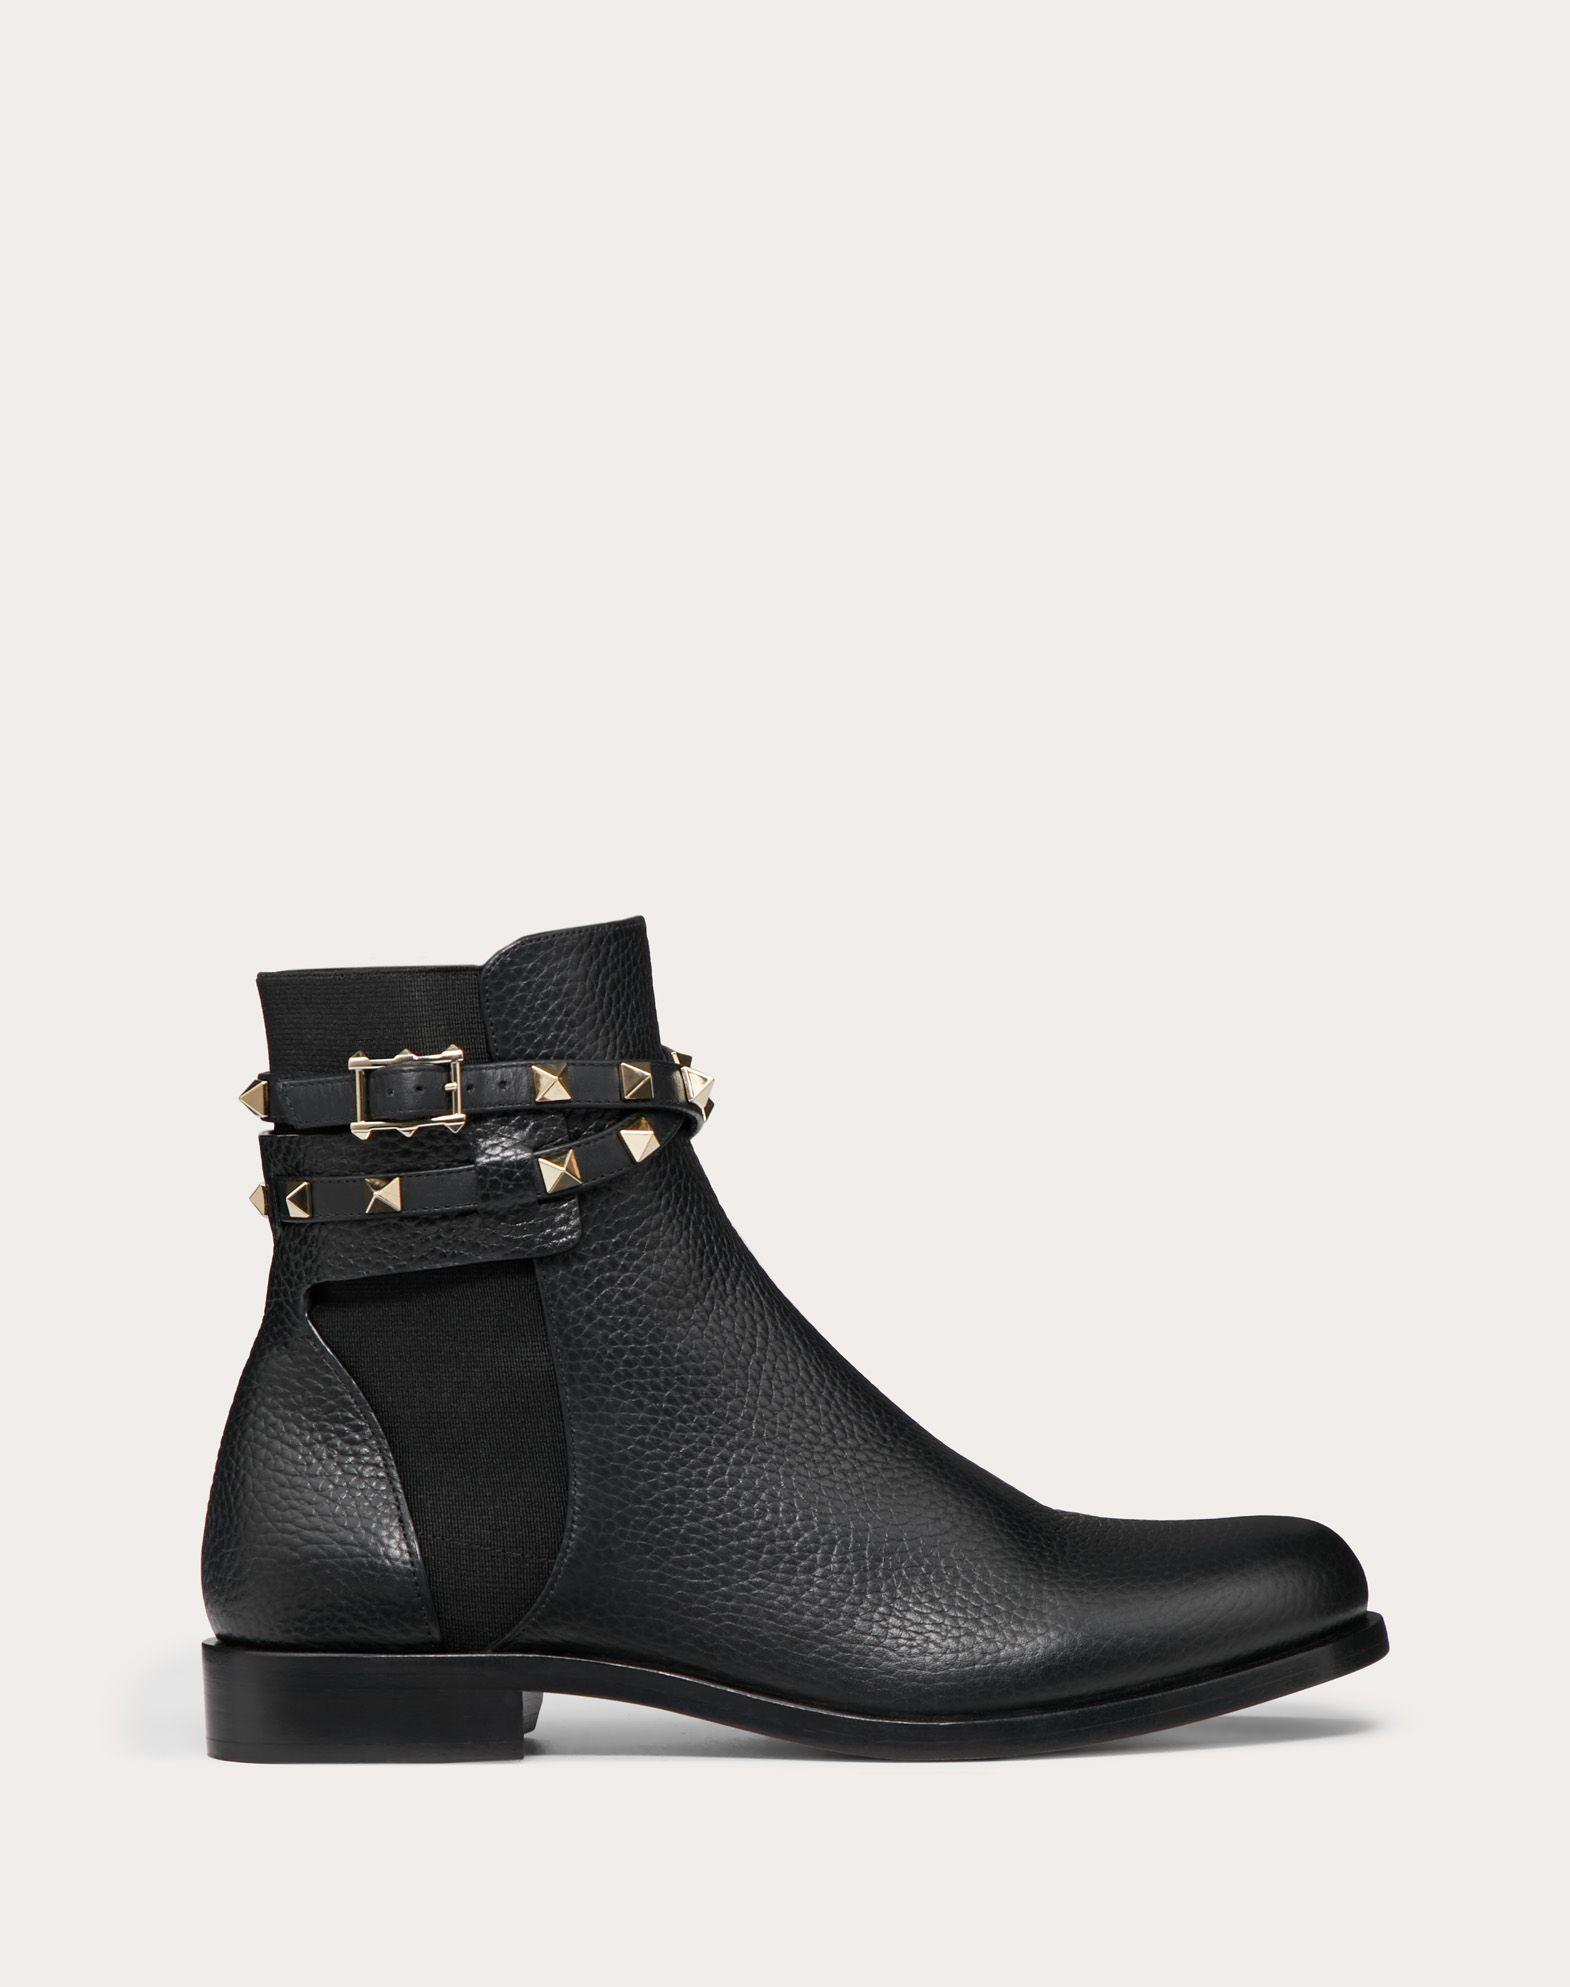 Valentino Rockstud Grainy Calfskin Leather Ankle Boot in Black - Save ...